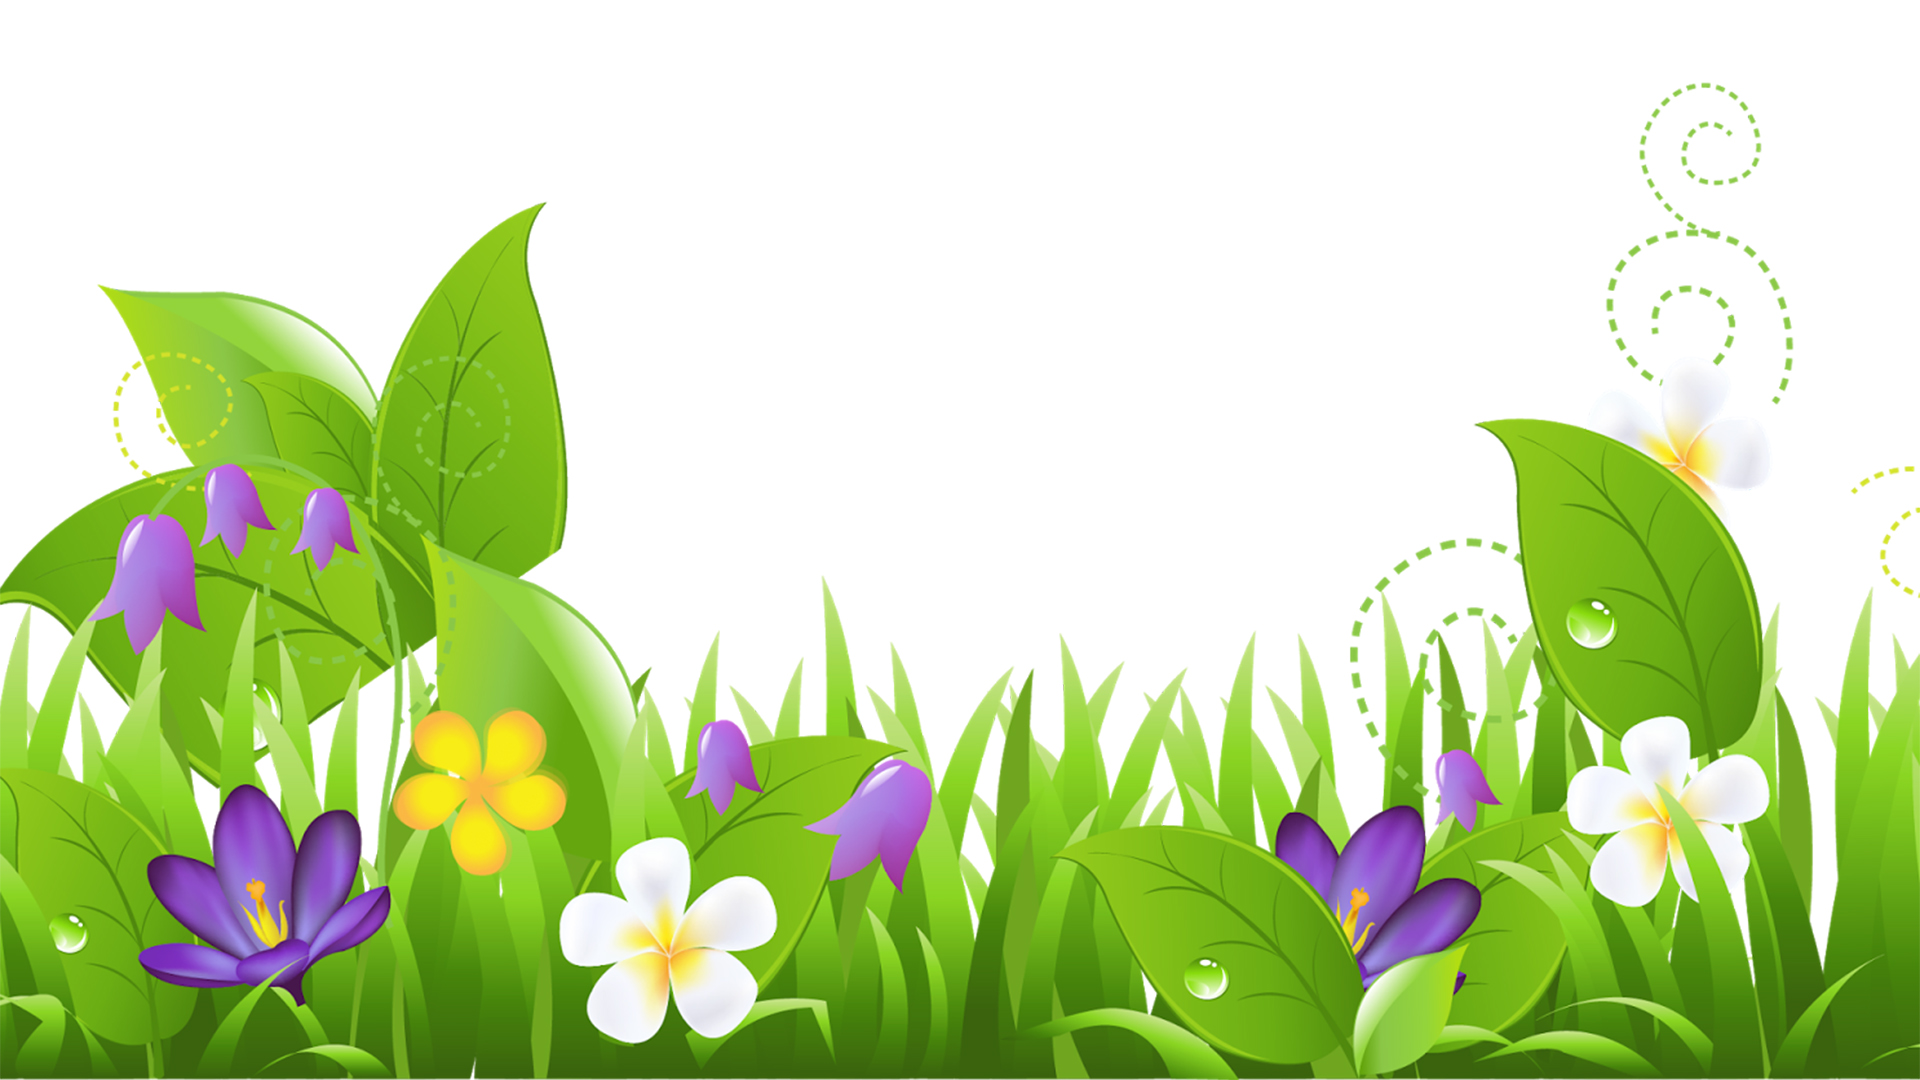 spring powerpoint templates